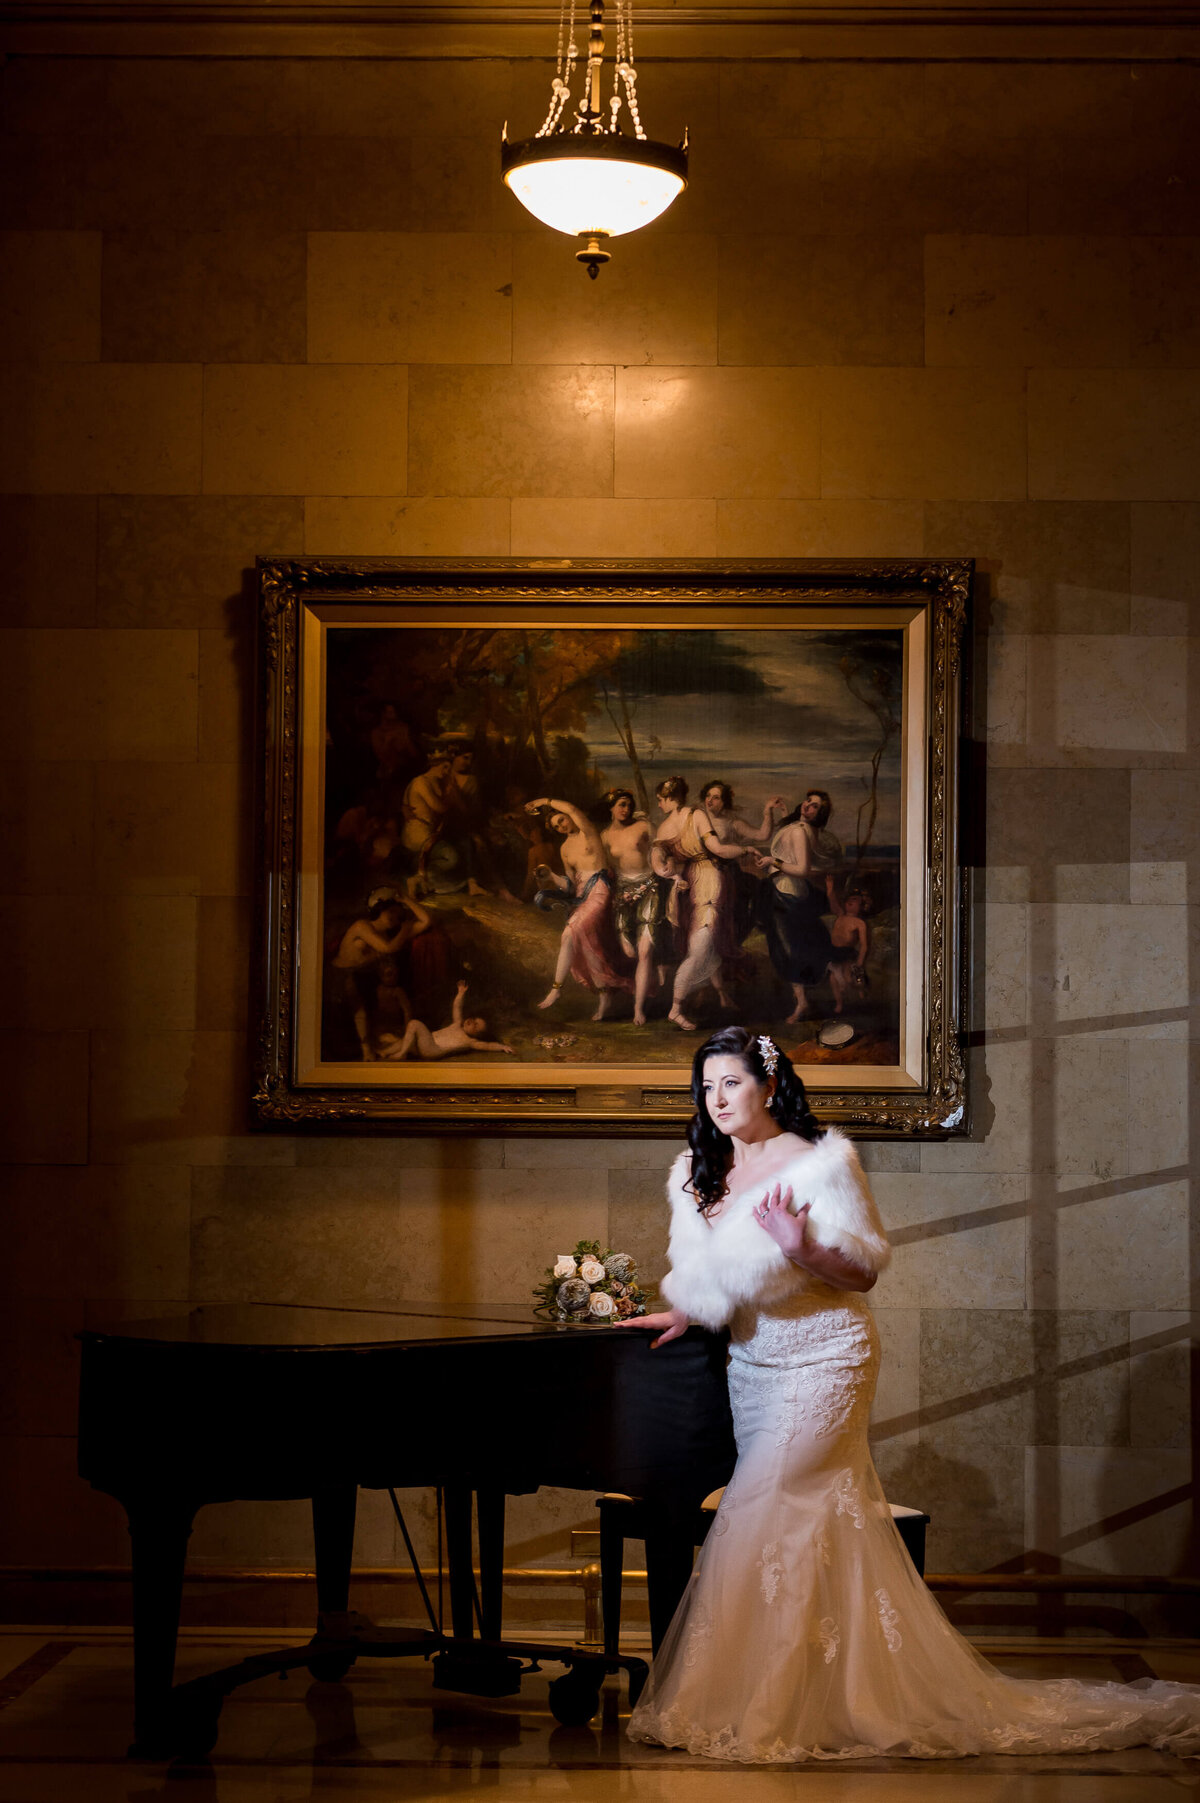 Ottawa wedding photography of an elegant bride leaning on the grand piano inside the Chateau Laurier hotel